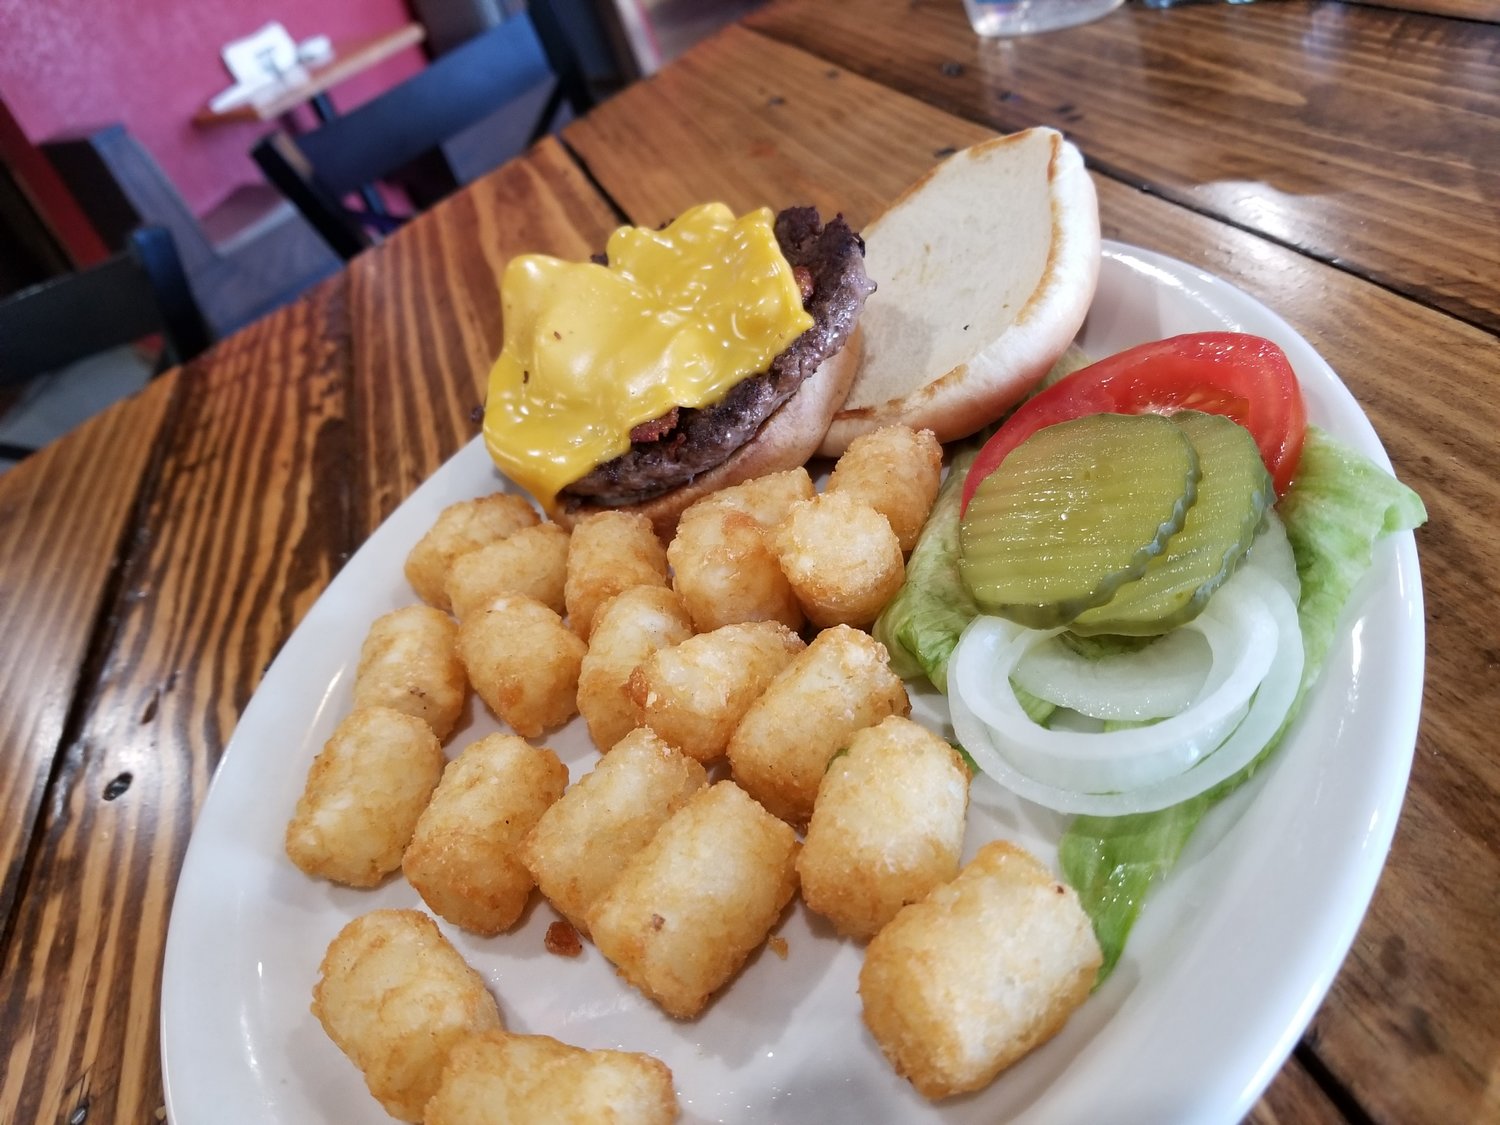 A simple burger and tater tots represents Bull Shooters’ approach to cooking: American diner fare in a friendly setting. [Dave Faries]